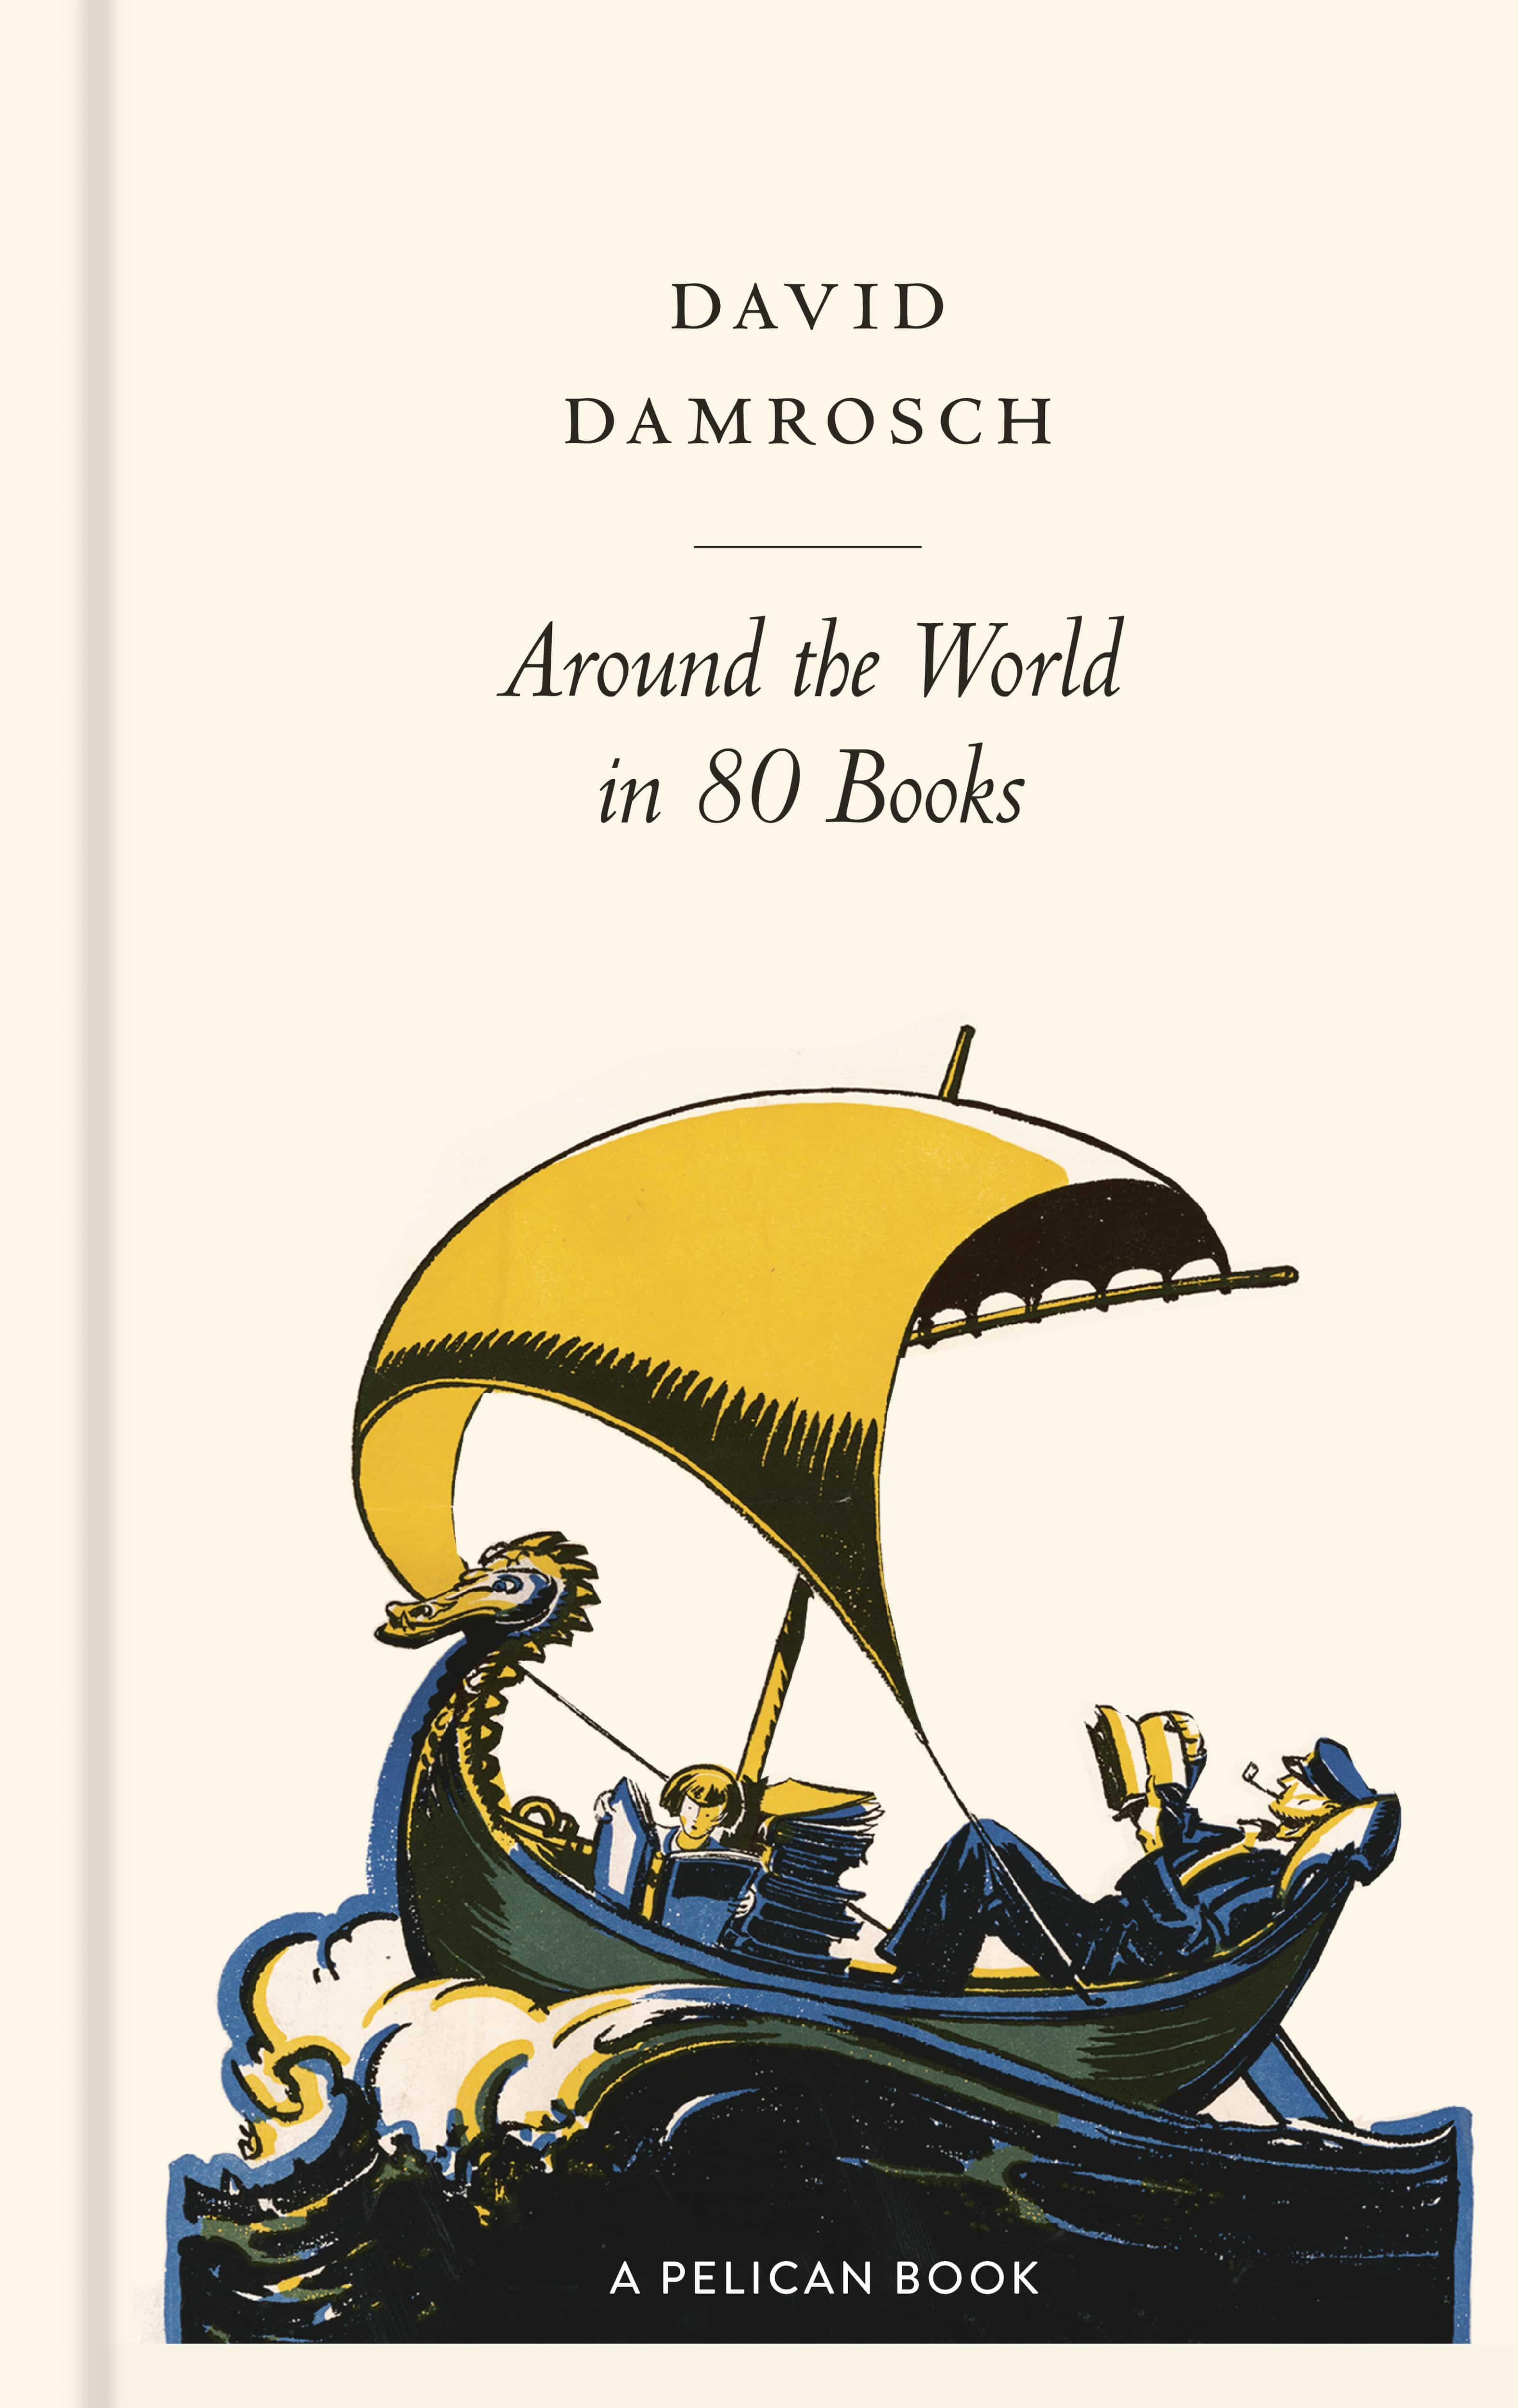 Book cover of Around the World in 80 Books by David Damrosch